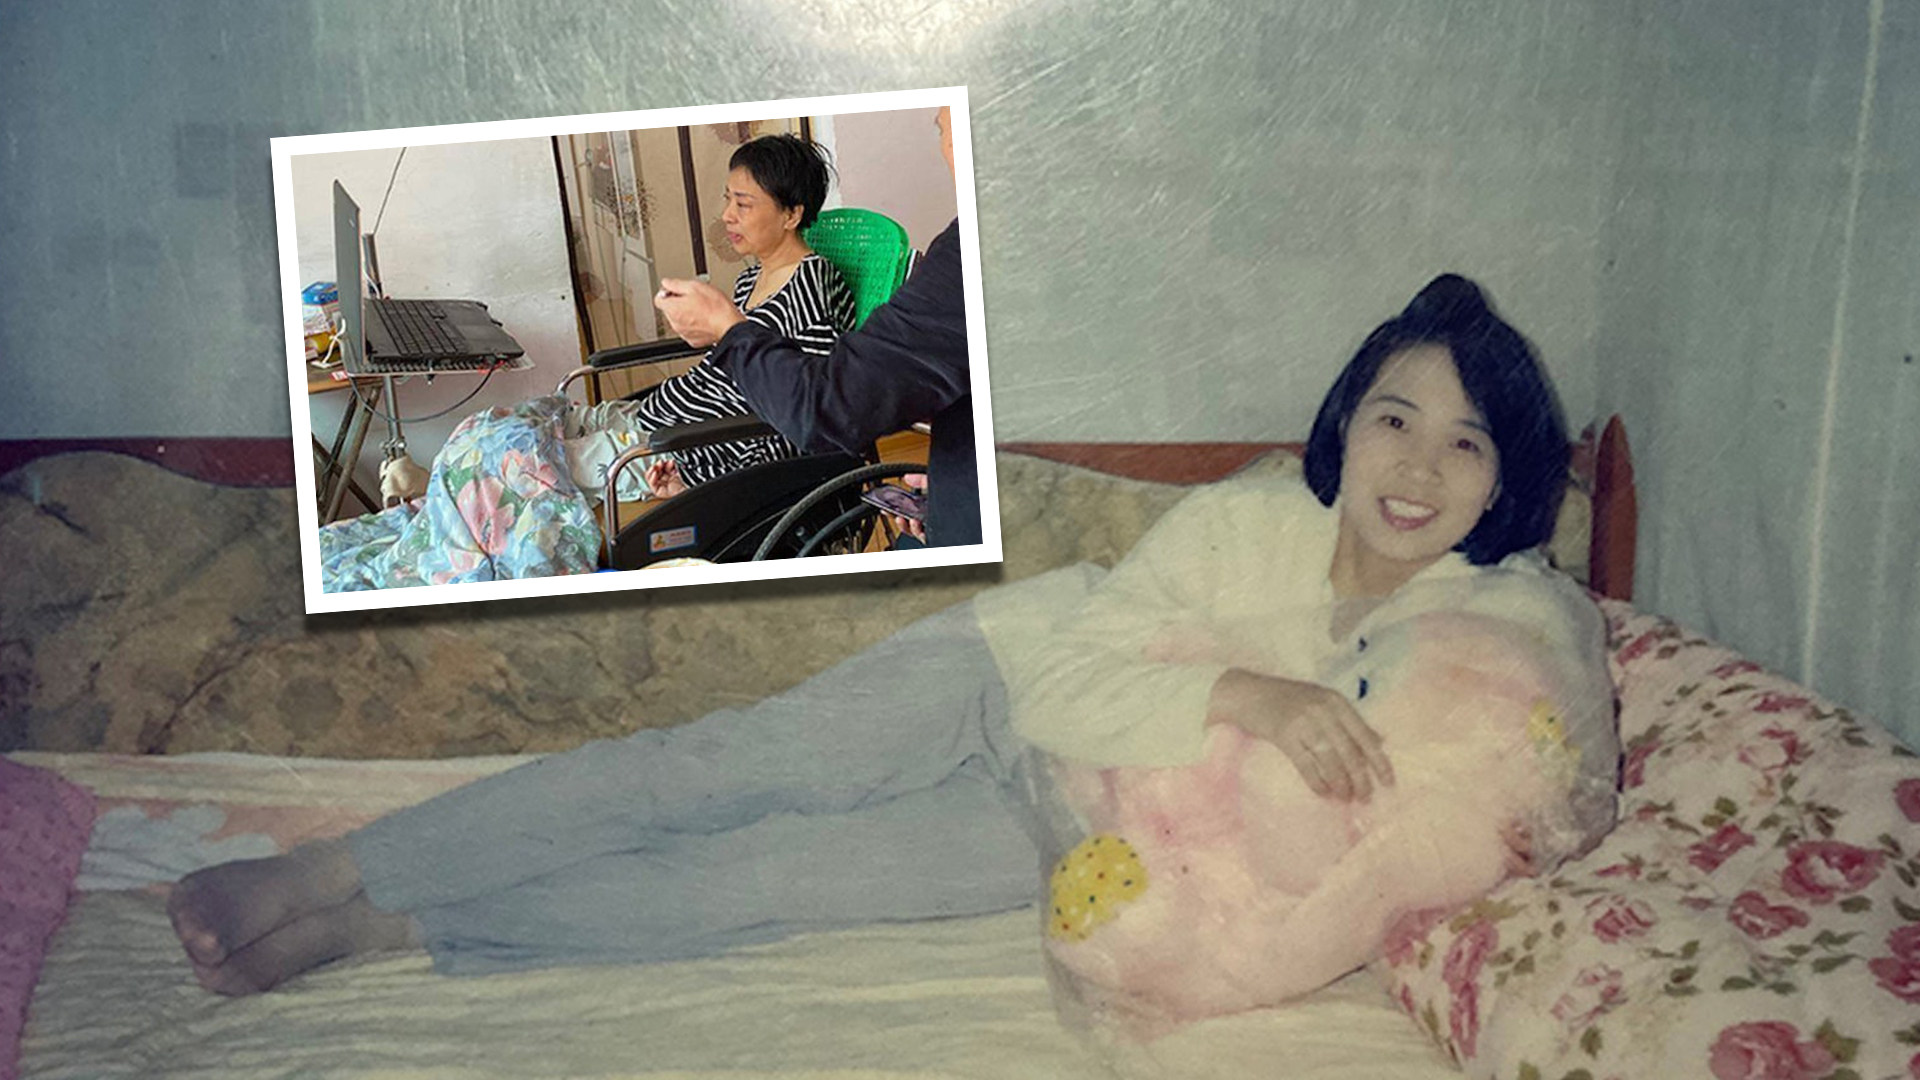 Mainland social media has witnessed a wave of sympathy for the terrible plight of a terminally-ill woman in China with a rare neurological condition, her story has also sparked an emotional online discussion about euthanasia. Photo: SCMP composite/6do.world